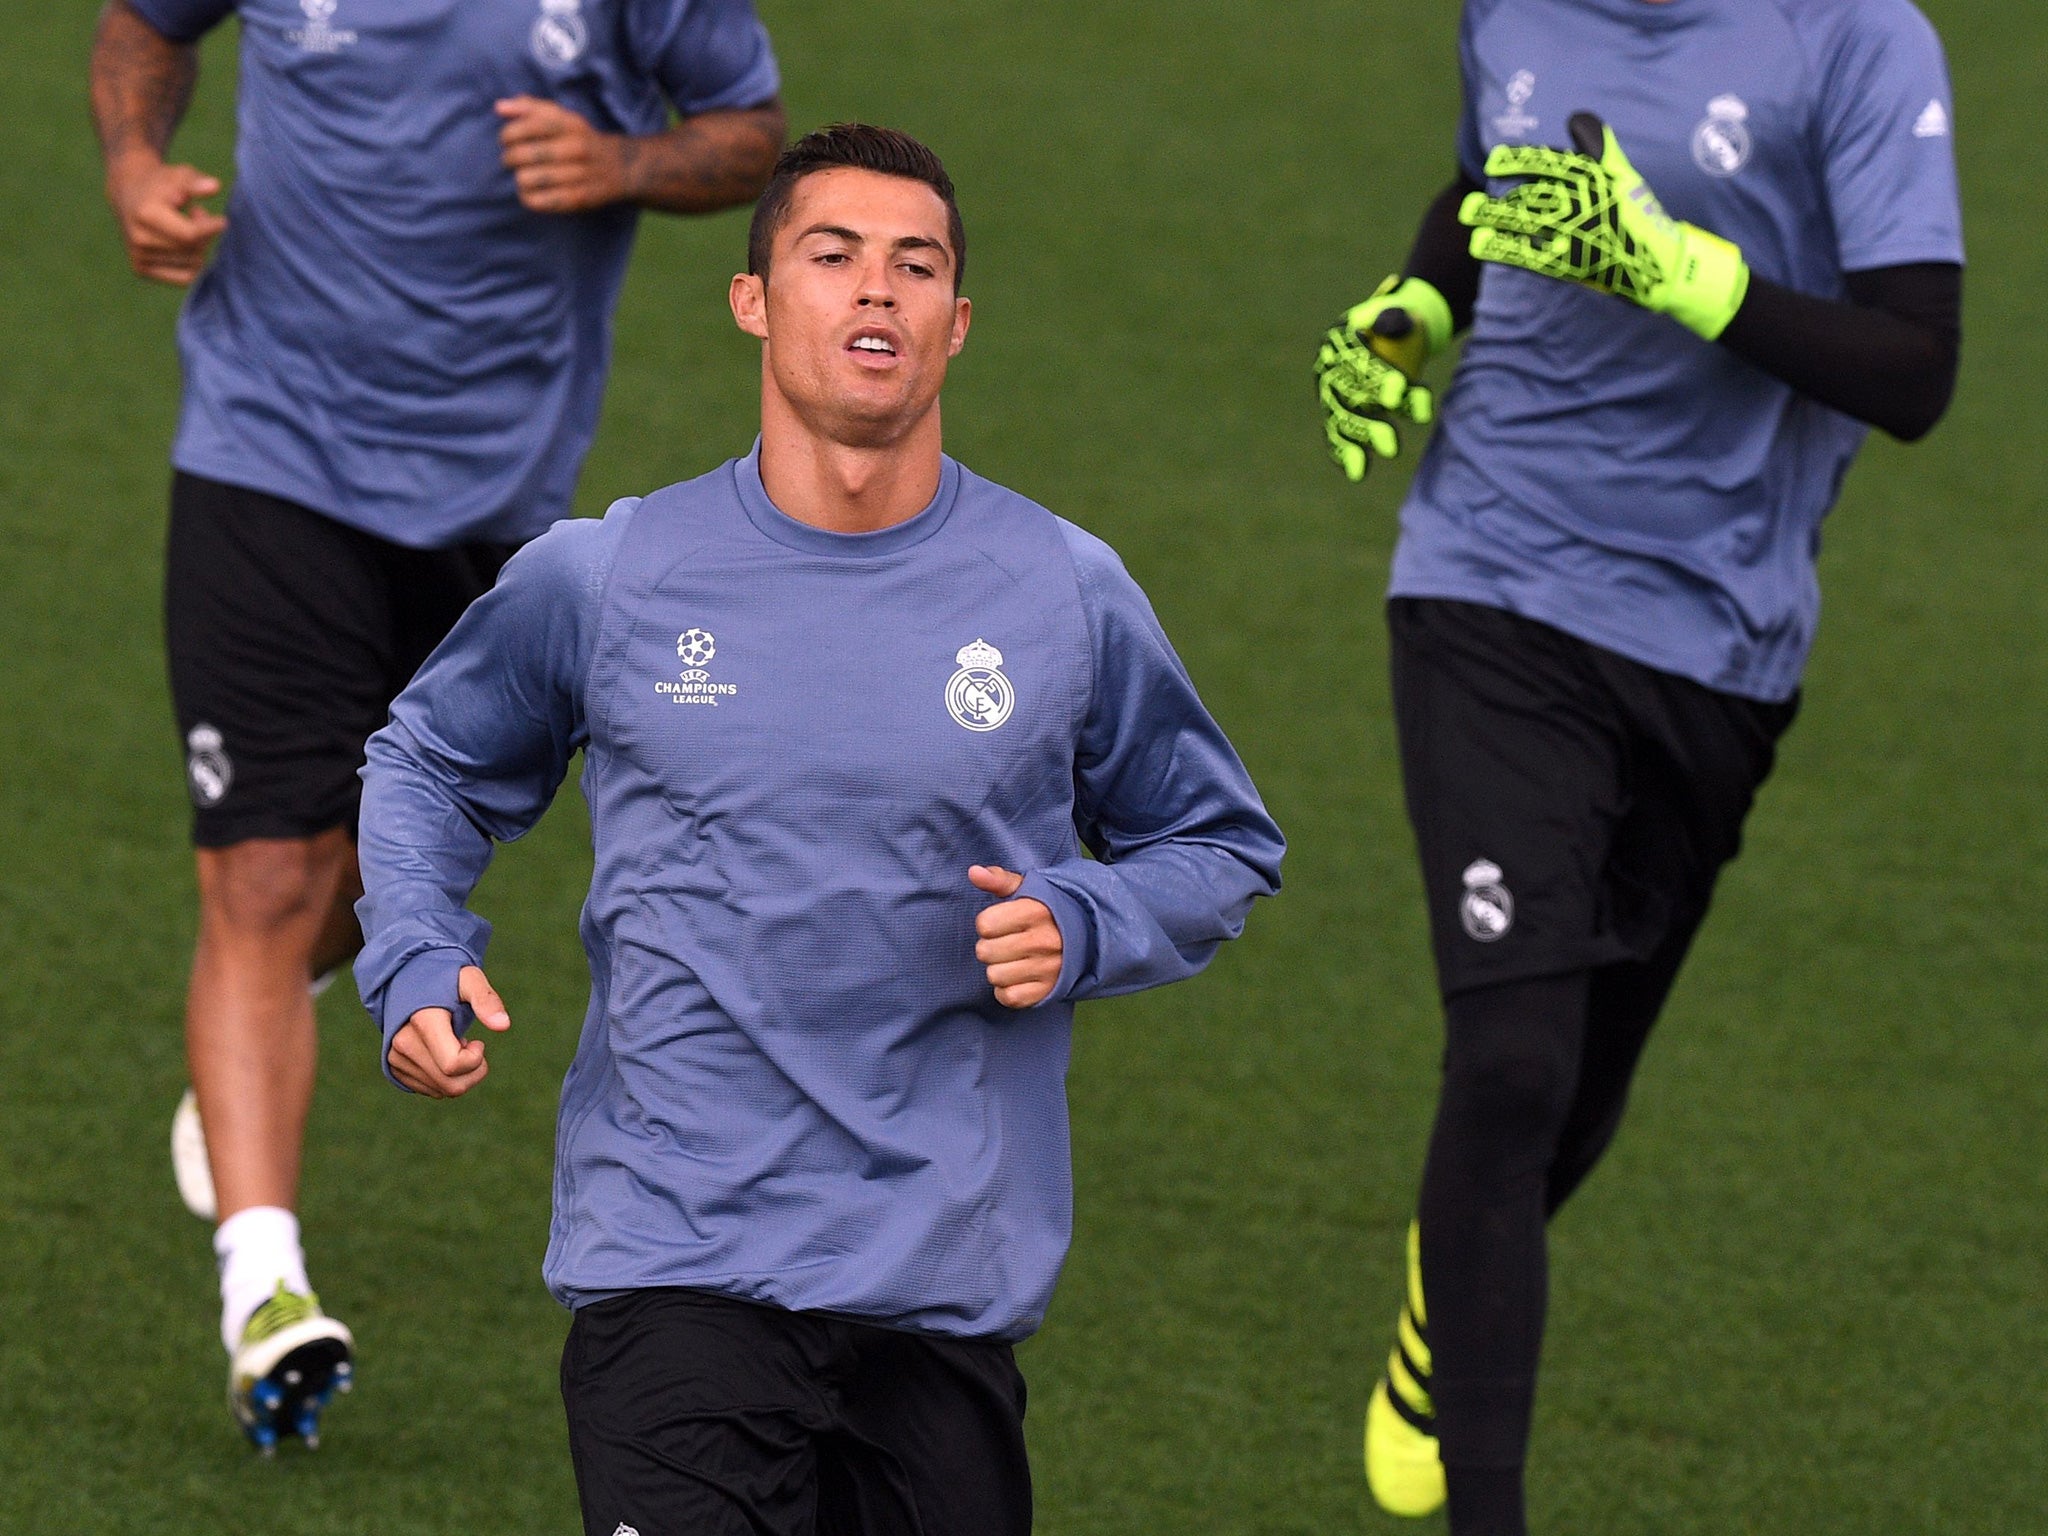 Ronaldo in training ahead of Wednesday's meeting with Sporting